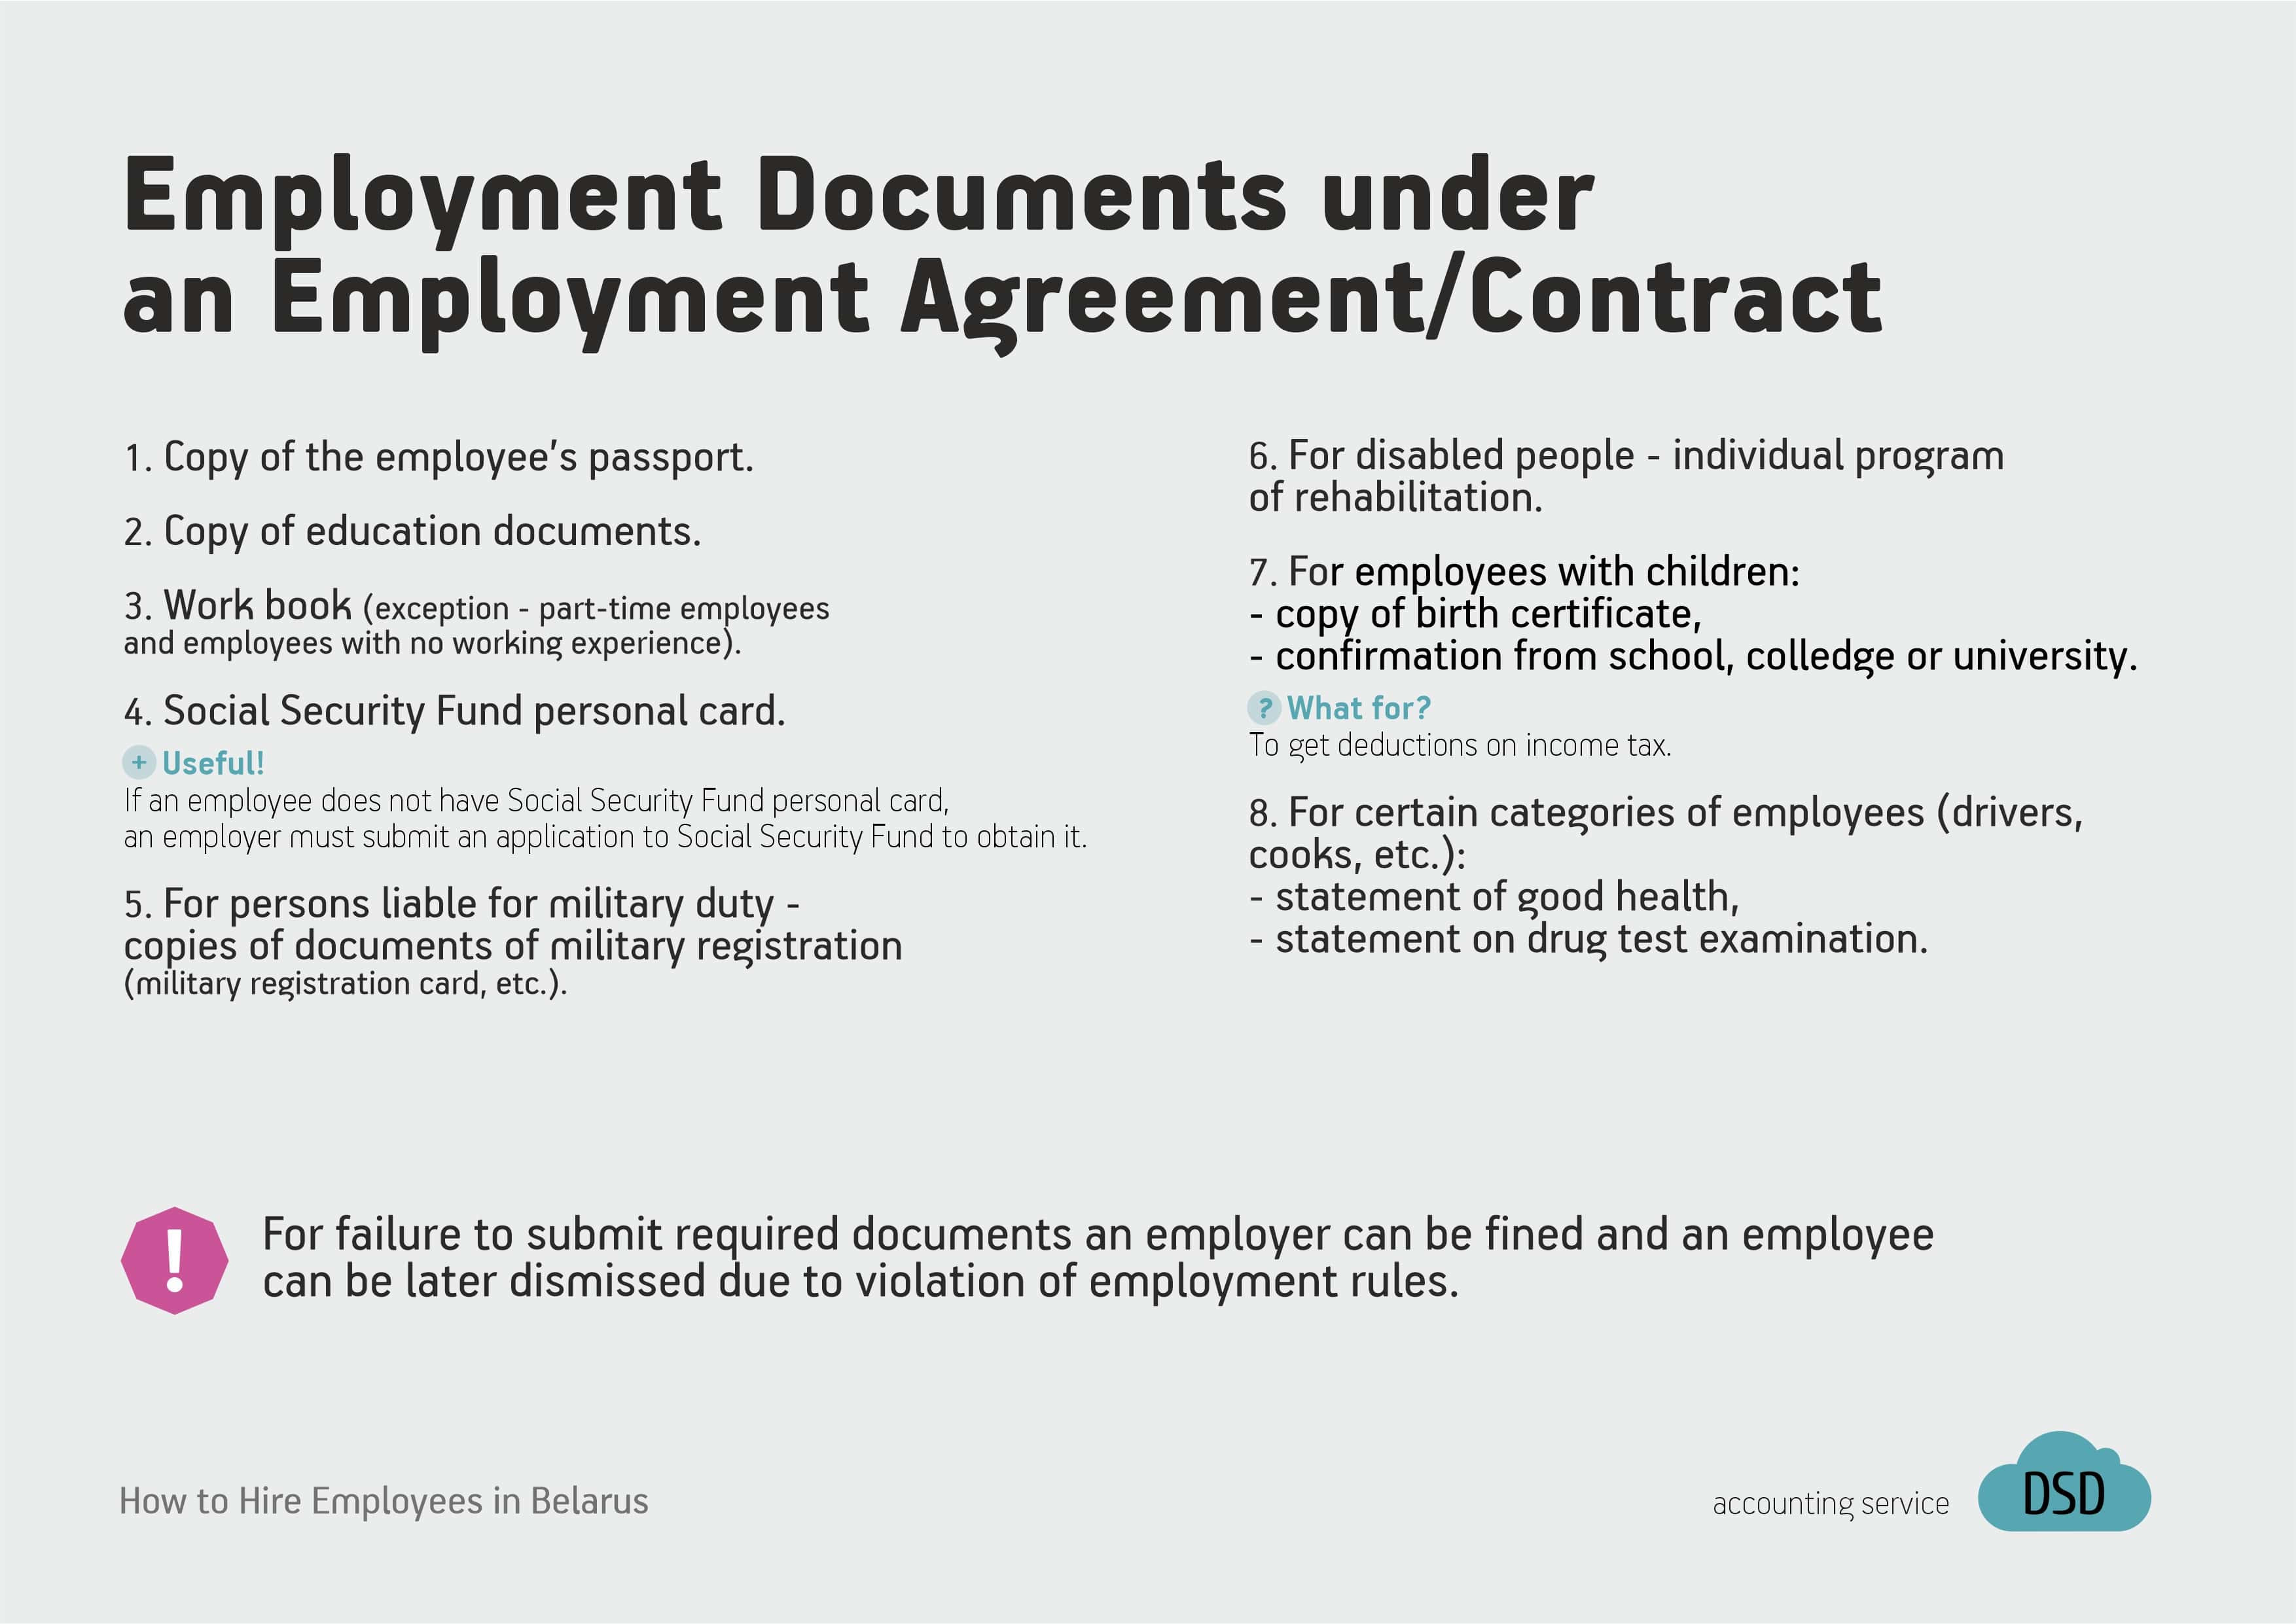 Necessary Documents for employment in Belarus